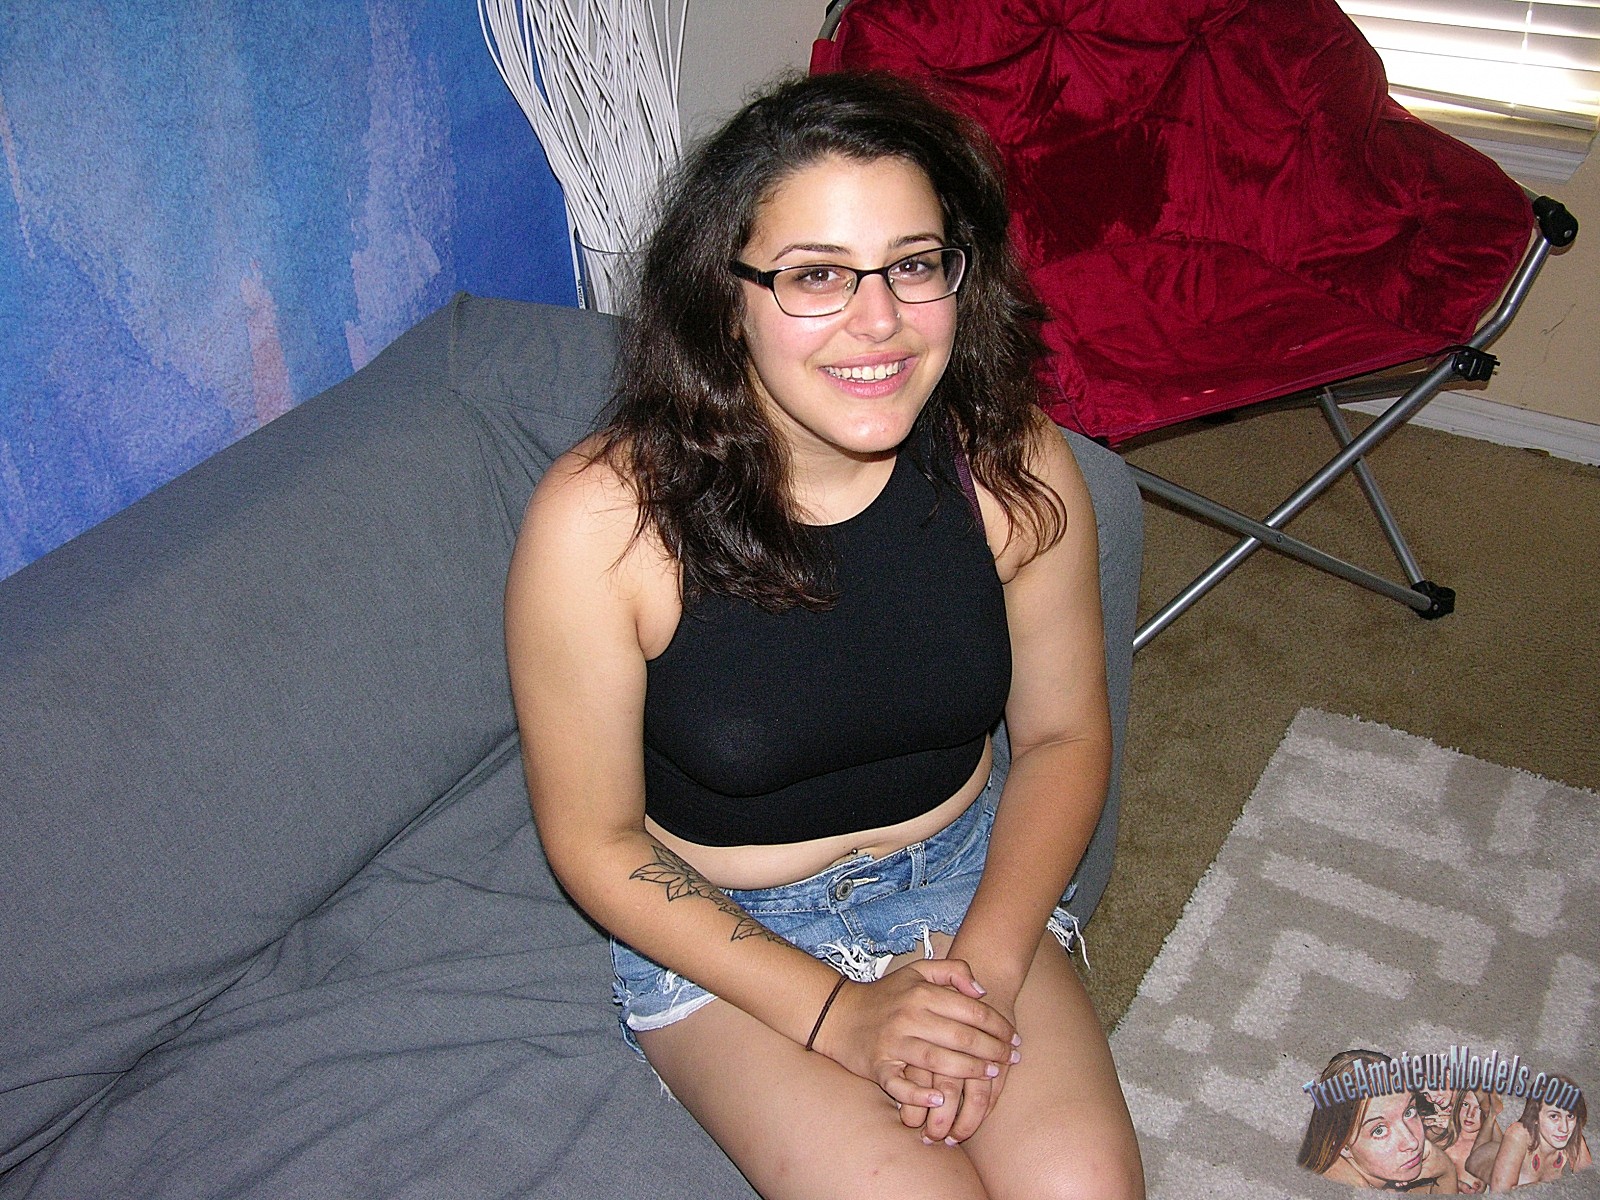 amateur-girl-nude-with-glasses1